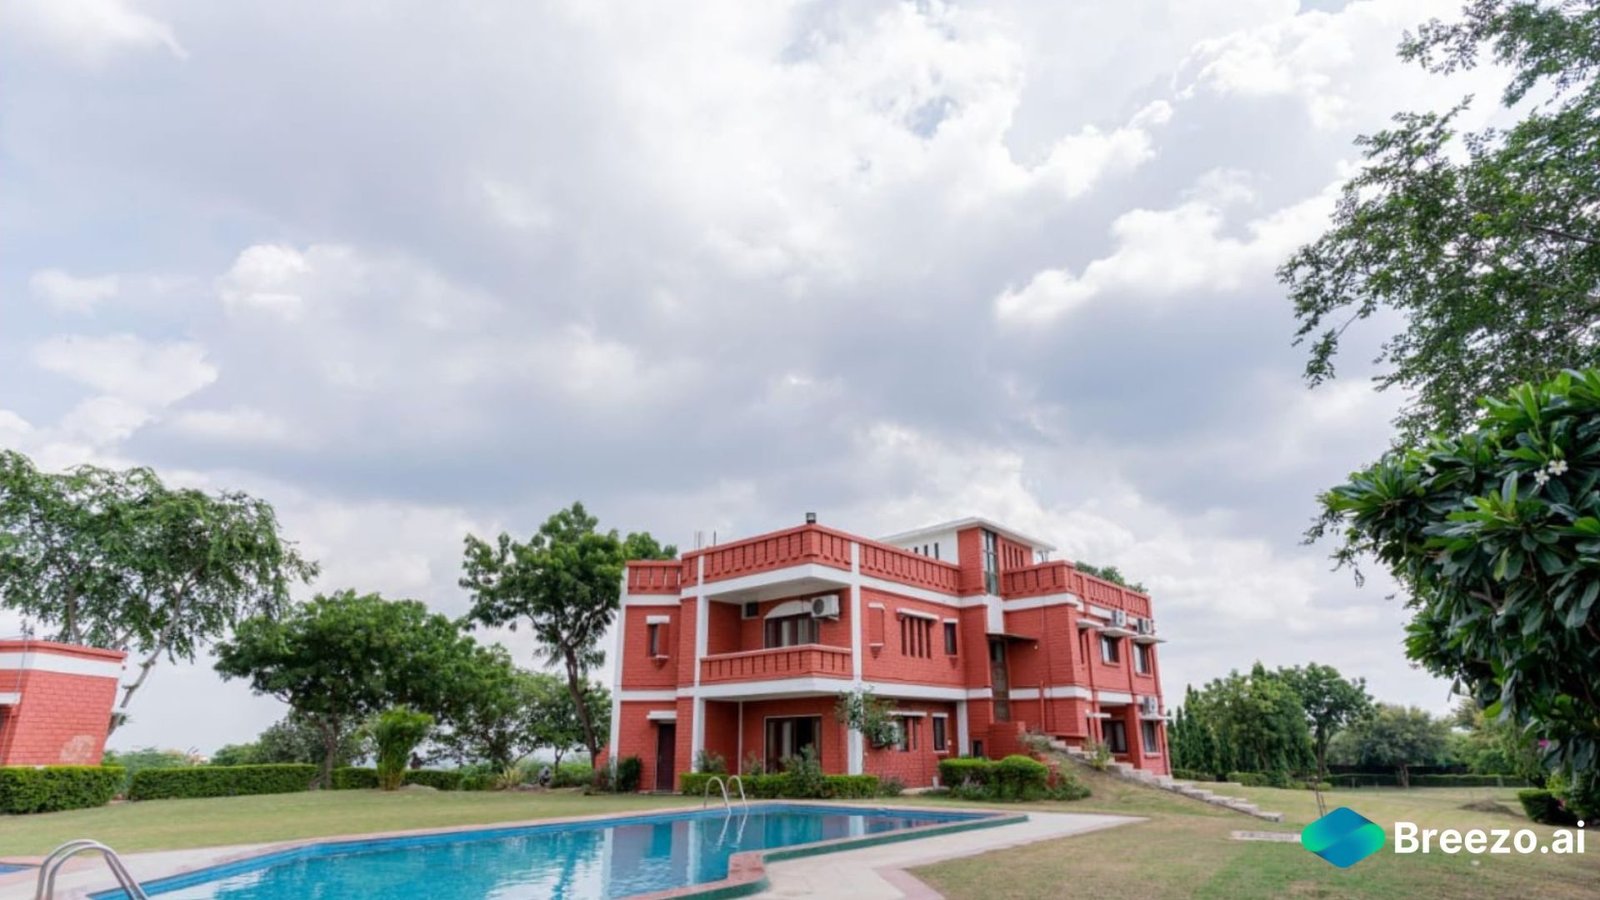 A stunning farmhouse for film shoots in Delhi NCR, Gurgaon, and Noida with lush lawns and a grand hall.